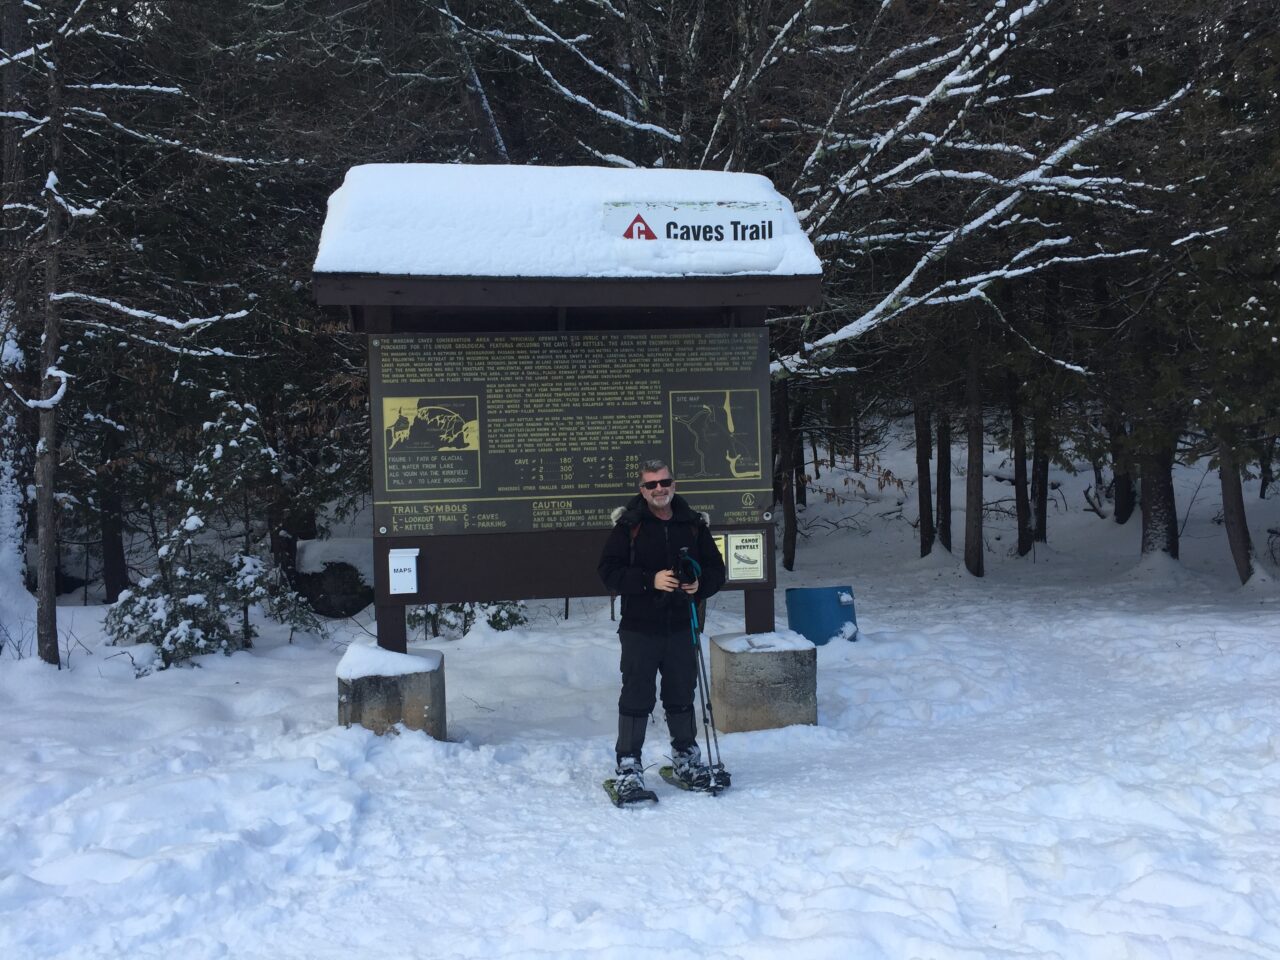 Man snowshoeing in front of Caves trail informational board